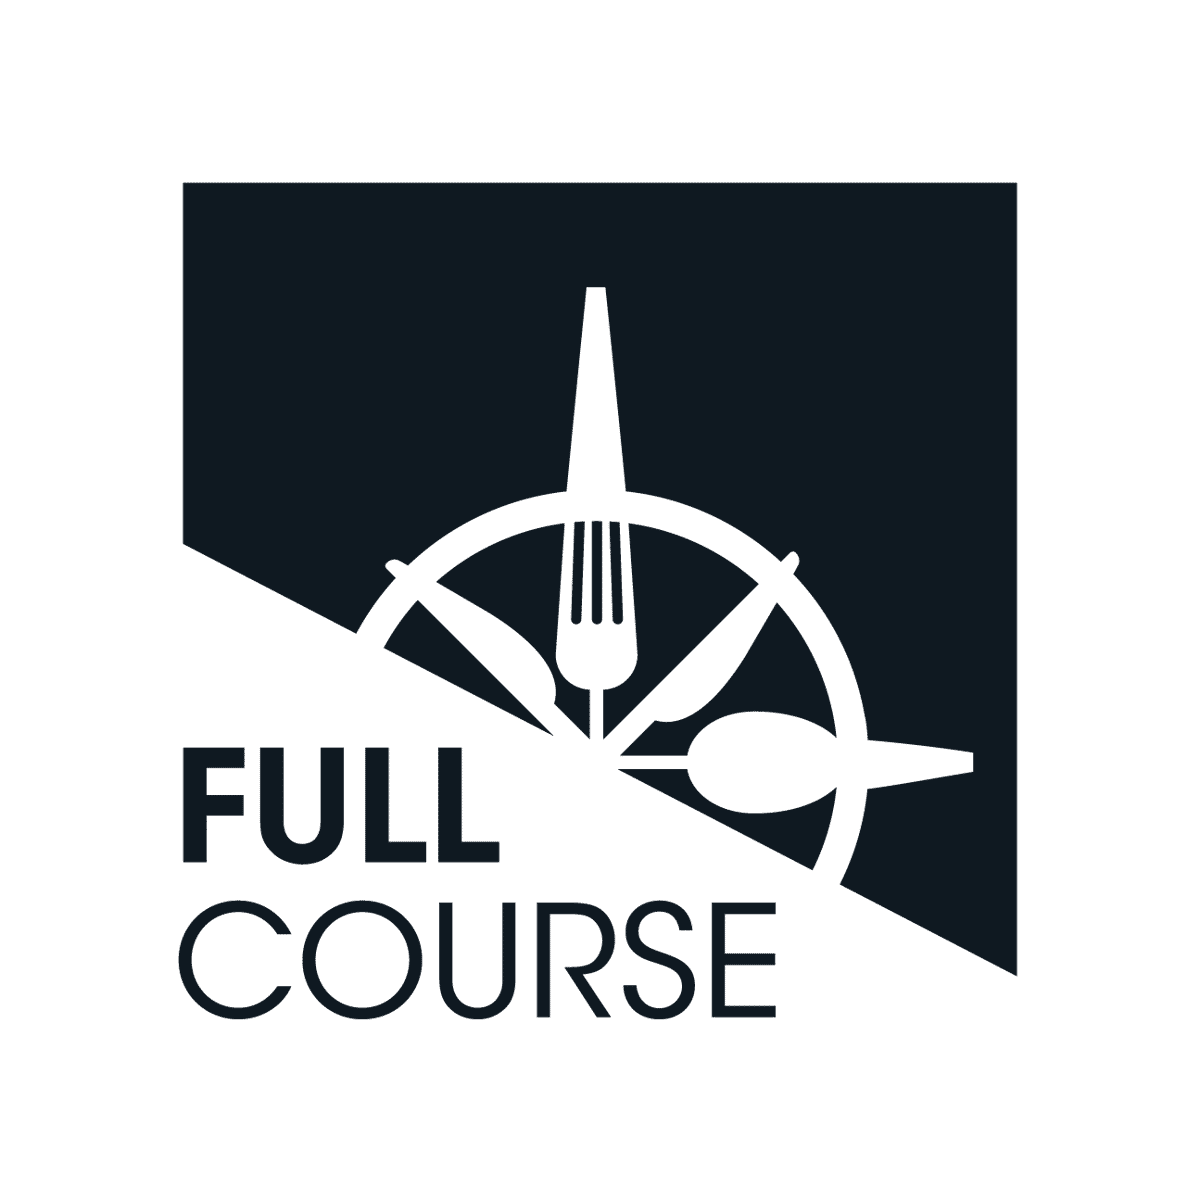 Full Course